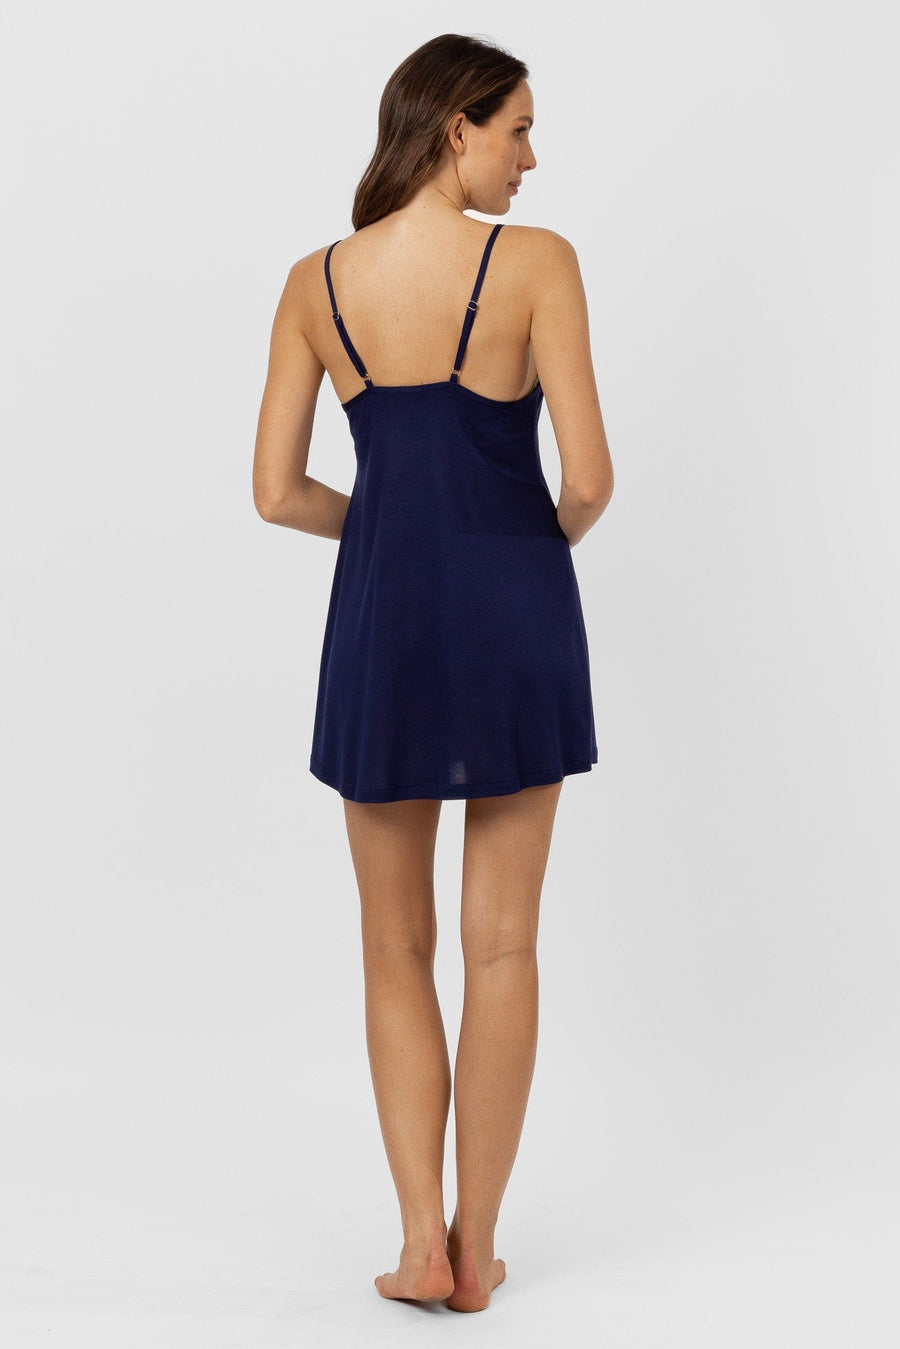 Willow Dress | Navy Nightgowns Australia Online | Reverie the Label  DRESSES Willow Dress